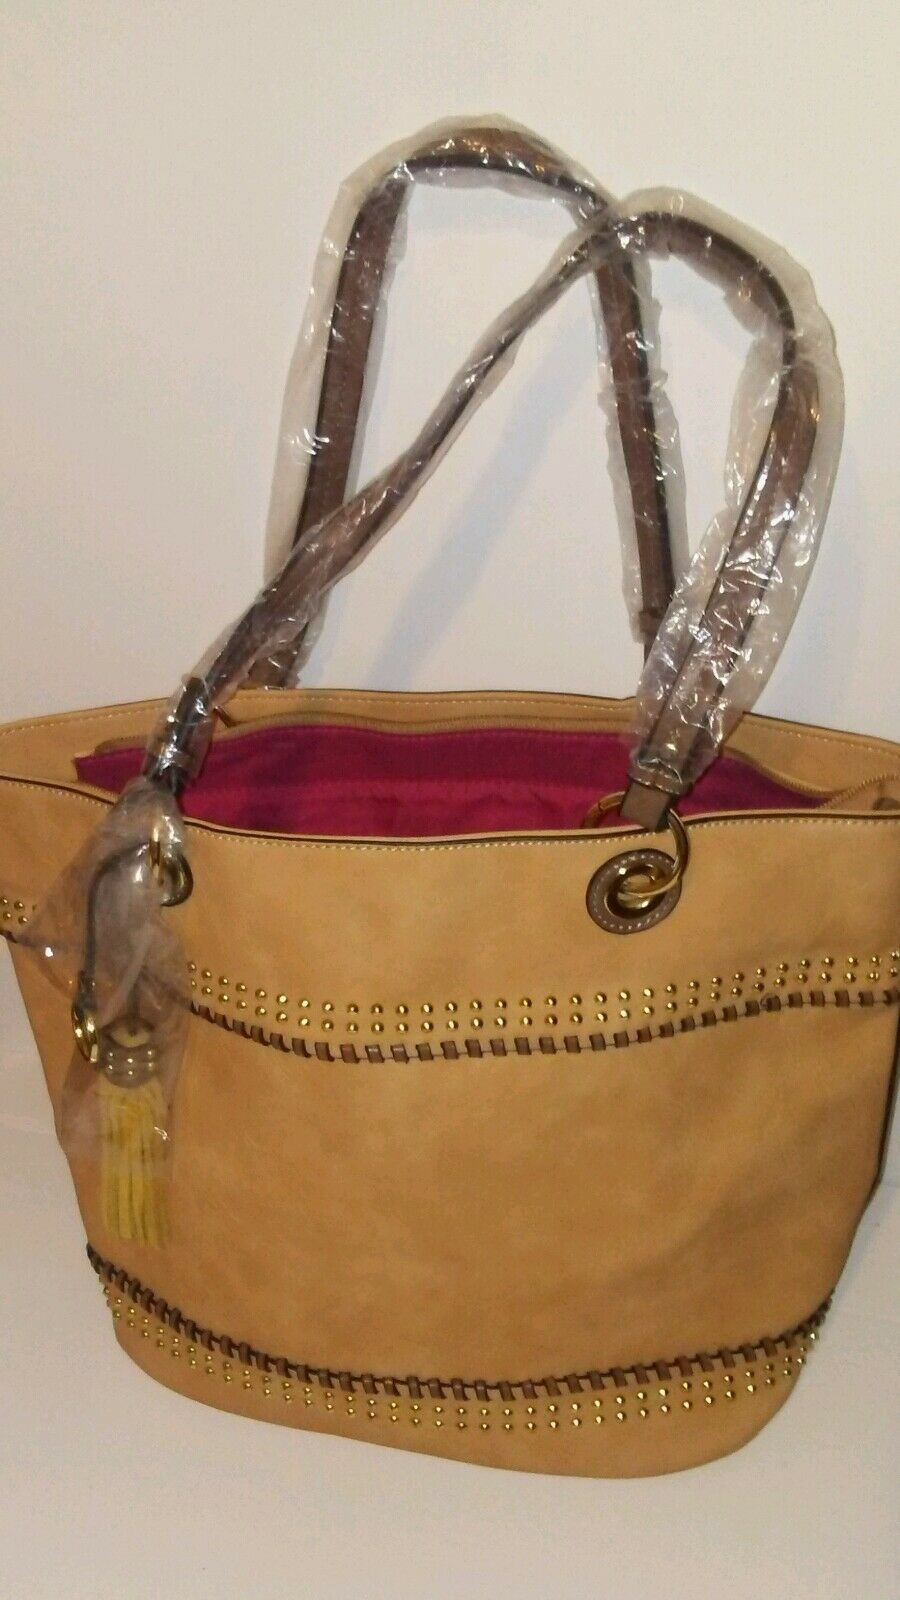 Womend Tan Beige Tote Shopping Handbag Purse with Fringes